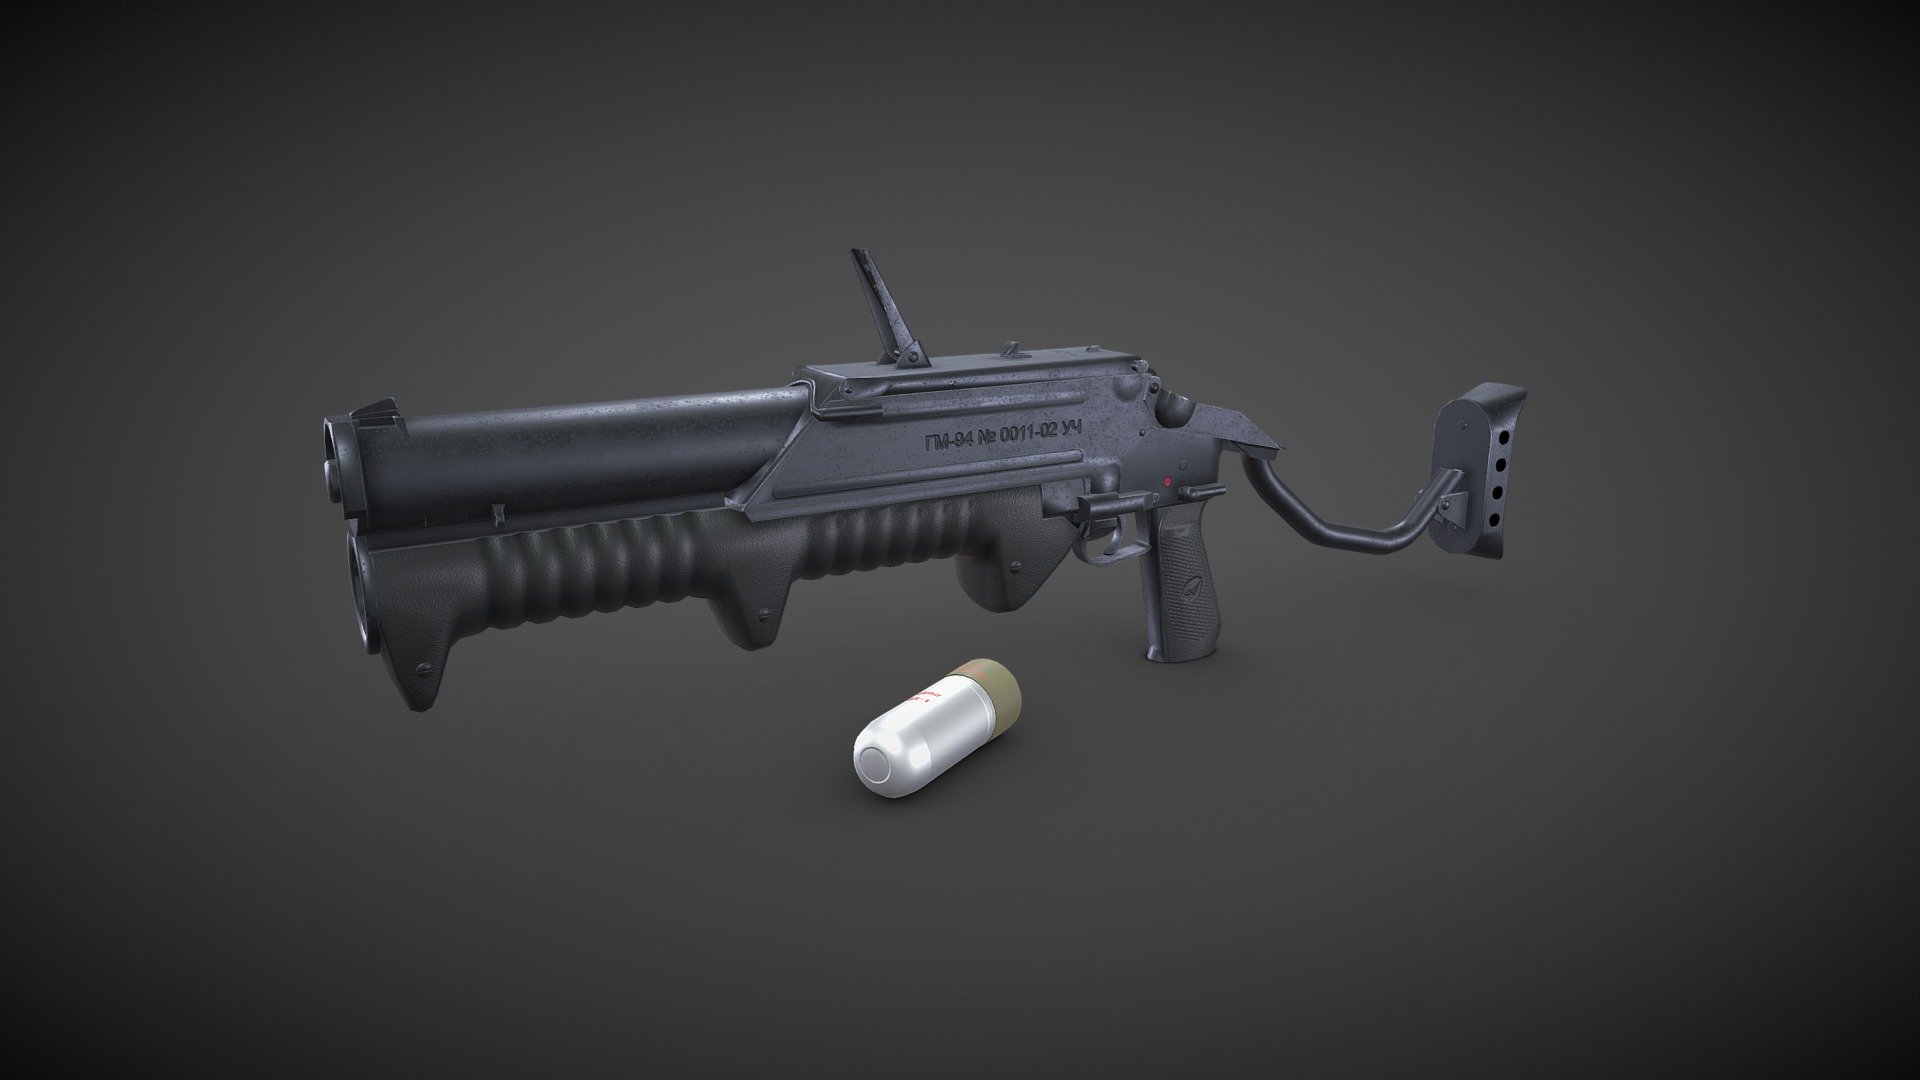 GM-94 Grenade Launcher




Low-poly ready to use in games, AR/VR (8500 tris)

Textures are in PNG format 4096x4096 PBR metalness 1 set.

Available formats: MAX 2018 and 2015, OBJ, MTL, FBX, .tbscene.

Separate objects for animation.

Files unit: Centimeters.

If you need any other file format you can always request it.

All formats include materials and textures.
 - GM-94 Grenade Launcher - Buy Royalty Free 3D model by MaX3Dd 3d model